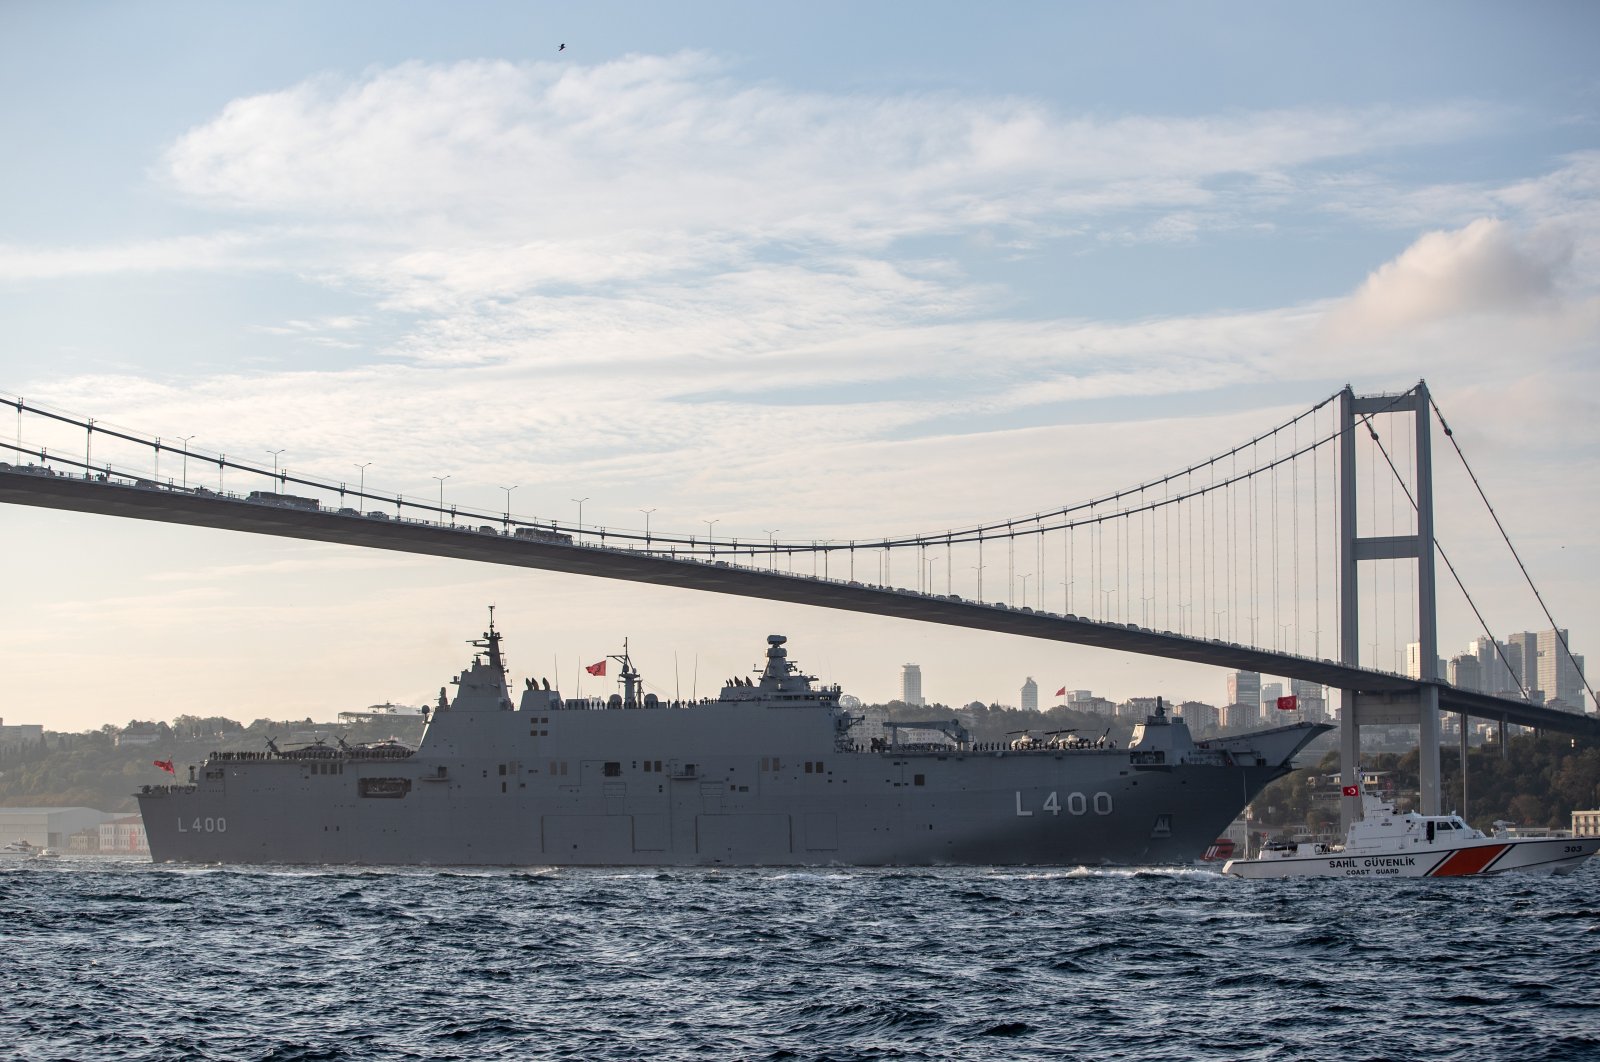 On the occasion of the 100th anniversary of the founding of the Republic of Türkiye, the warship TCG Anadolu belonging to the Turkish Navy is seen during the official parade in the Bosporus, Istanbul, Türkiye, Oct. 29, 2023. (Reuters Photo)